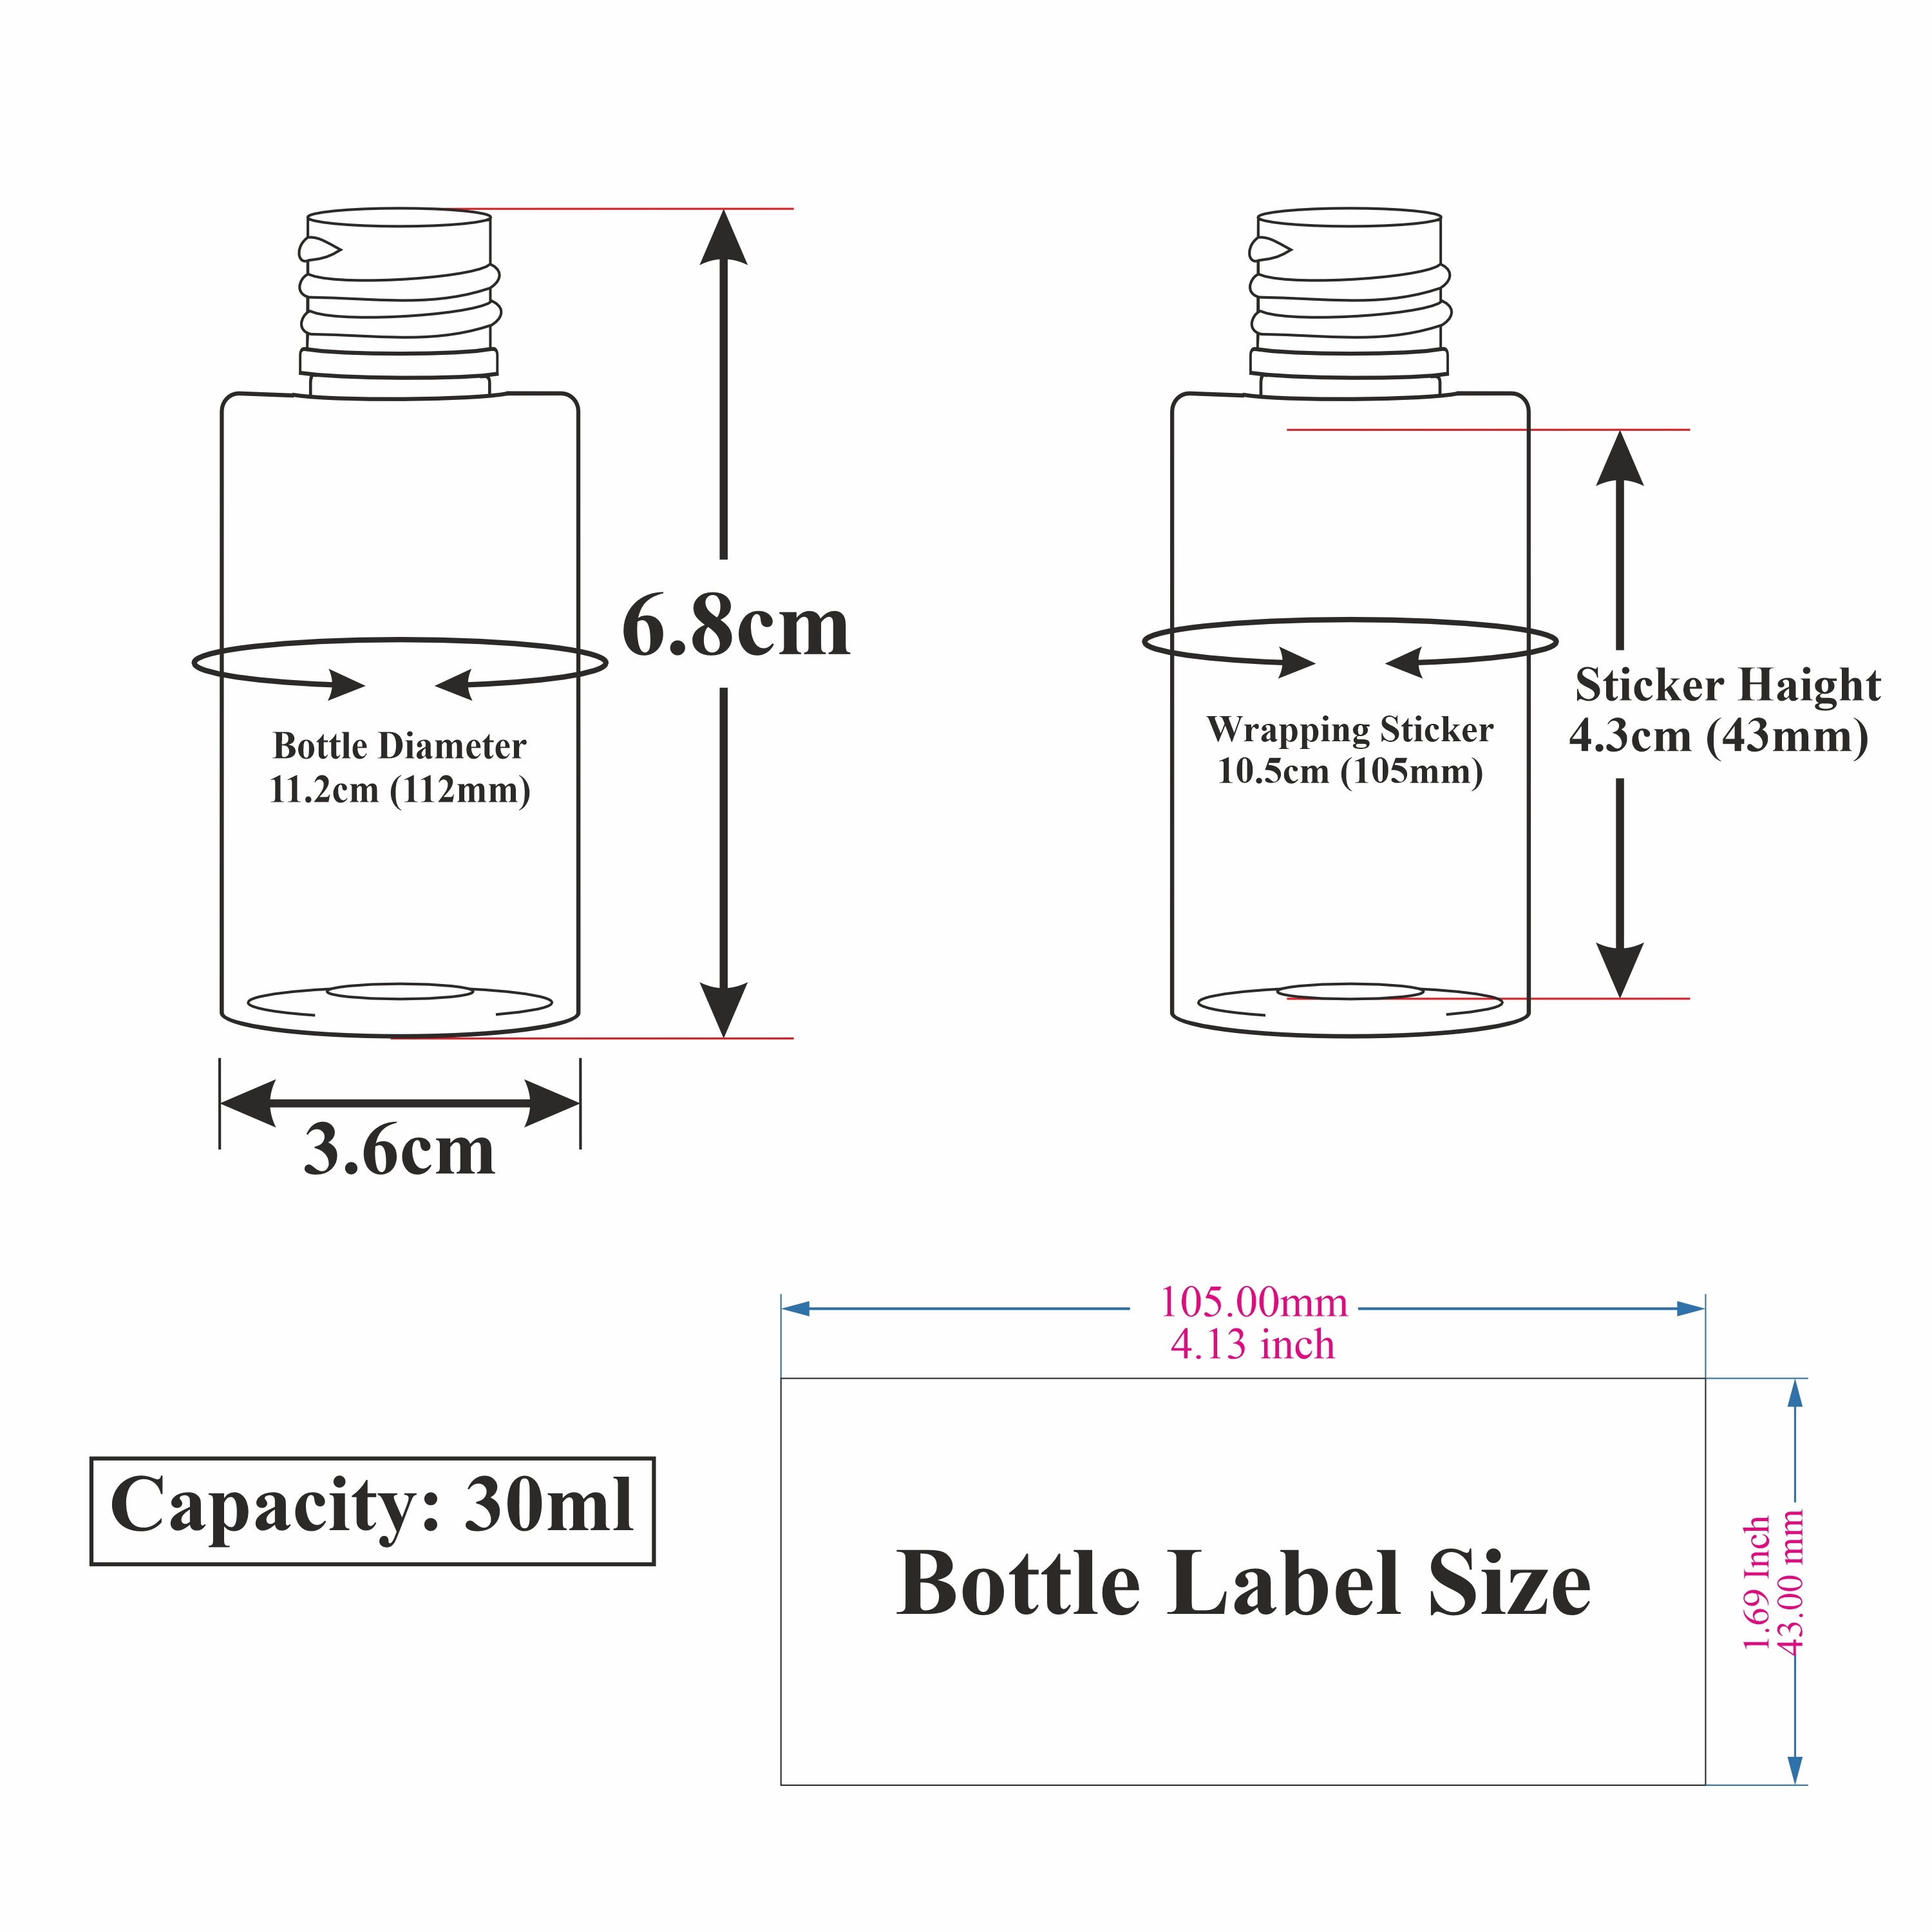 Frosted Glass Bottle With Silver Plated Push Button Dropper [ZMG53] 25ml, 30ml, 50ml, 100ml